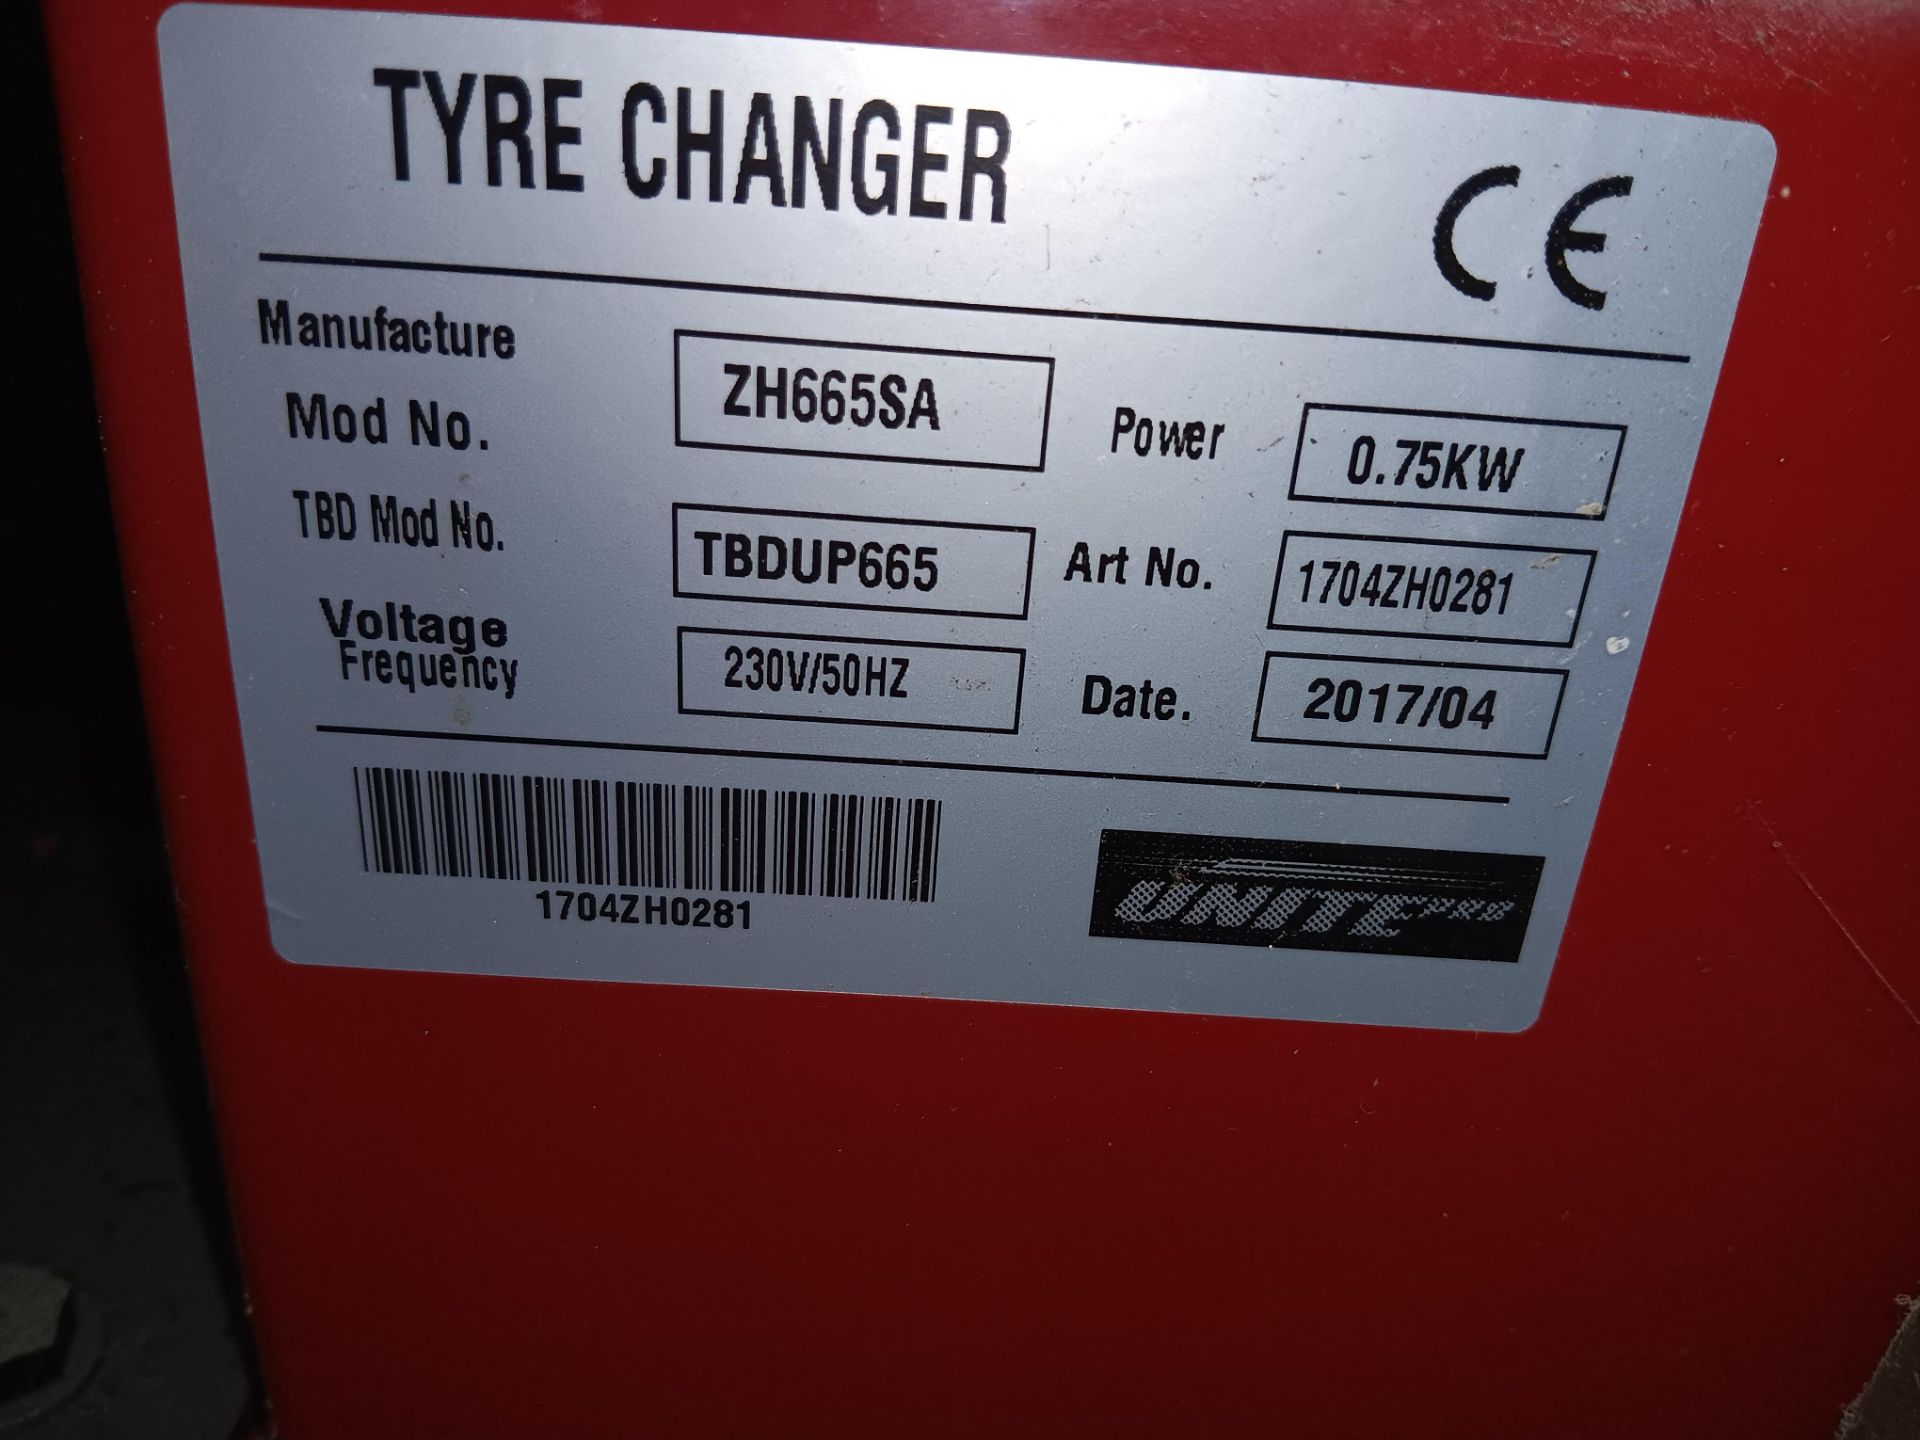 Unite Pro UP665 fully automatic tyre changer (Apr 2017) serial number 1704ZH0281 - Image 5 of 5